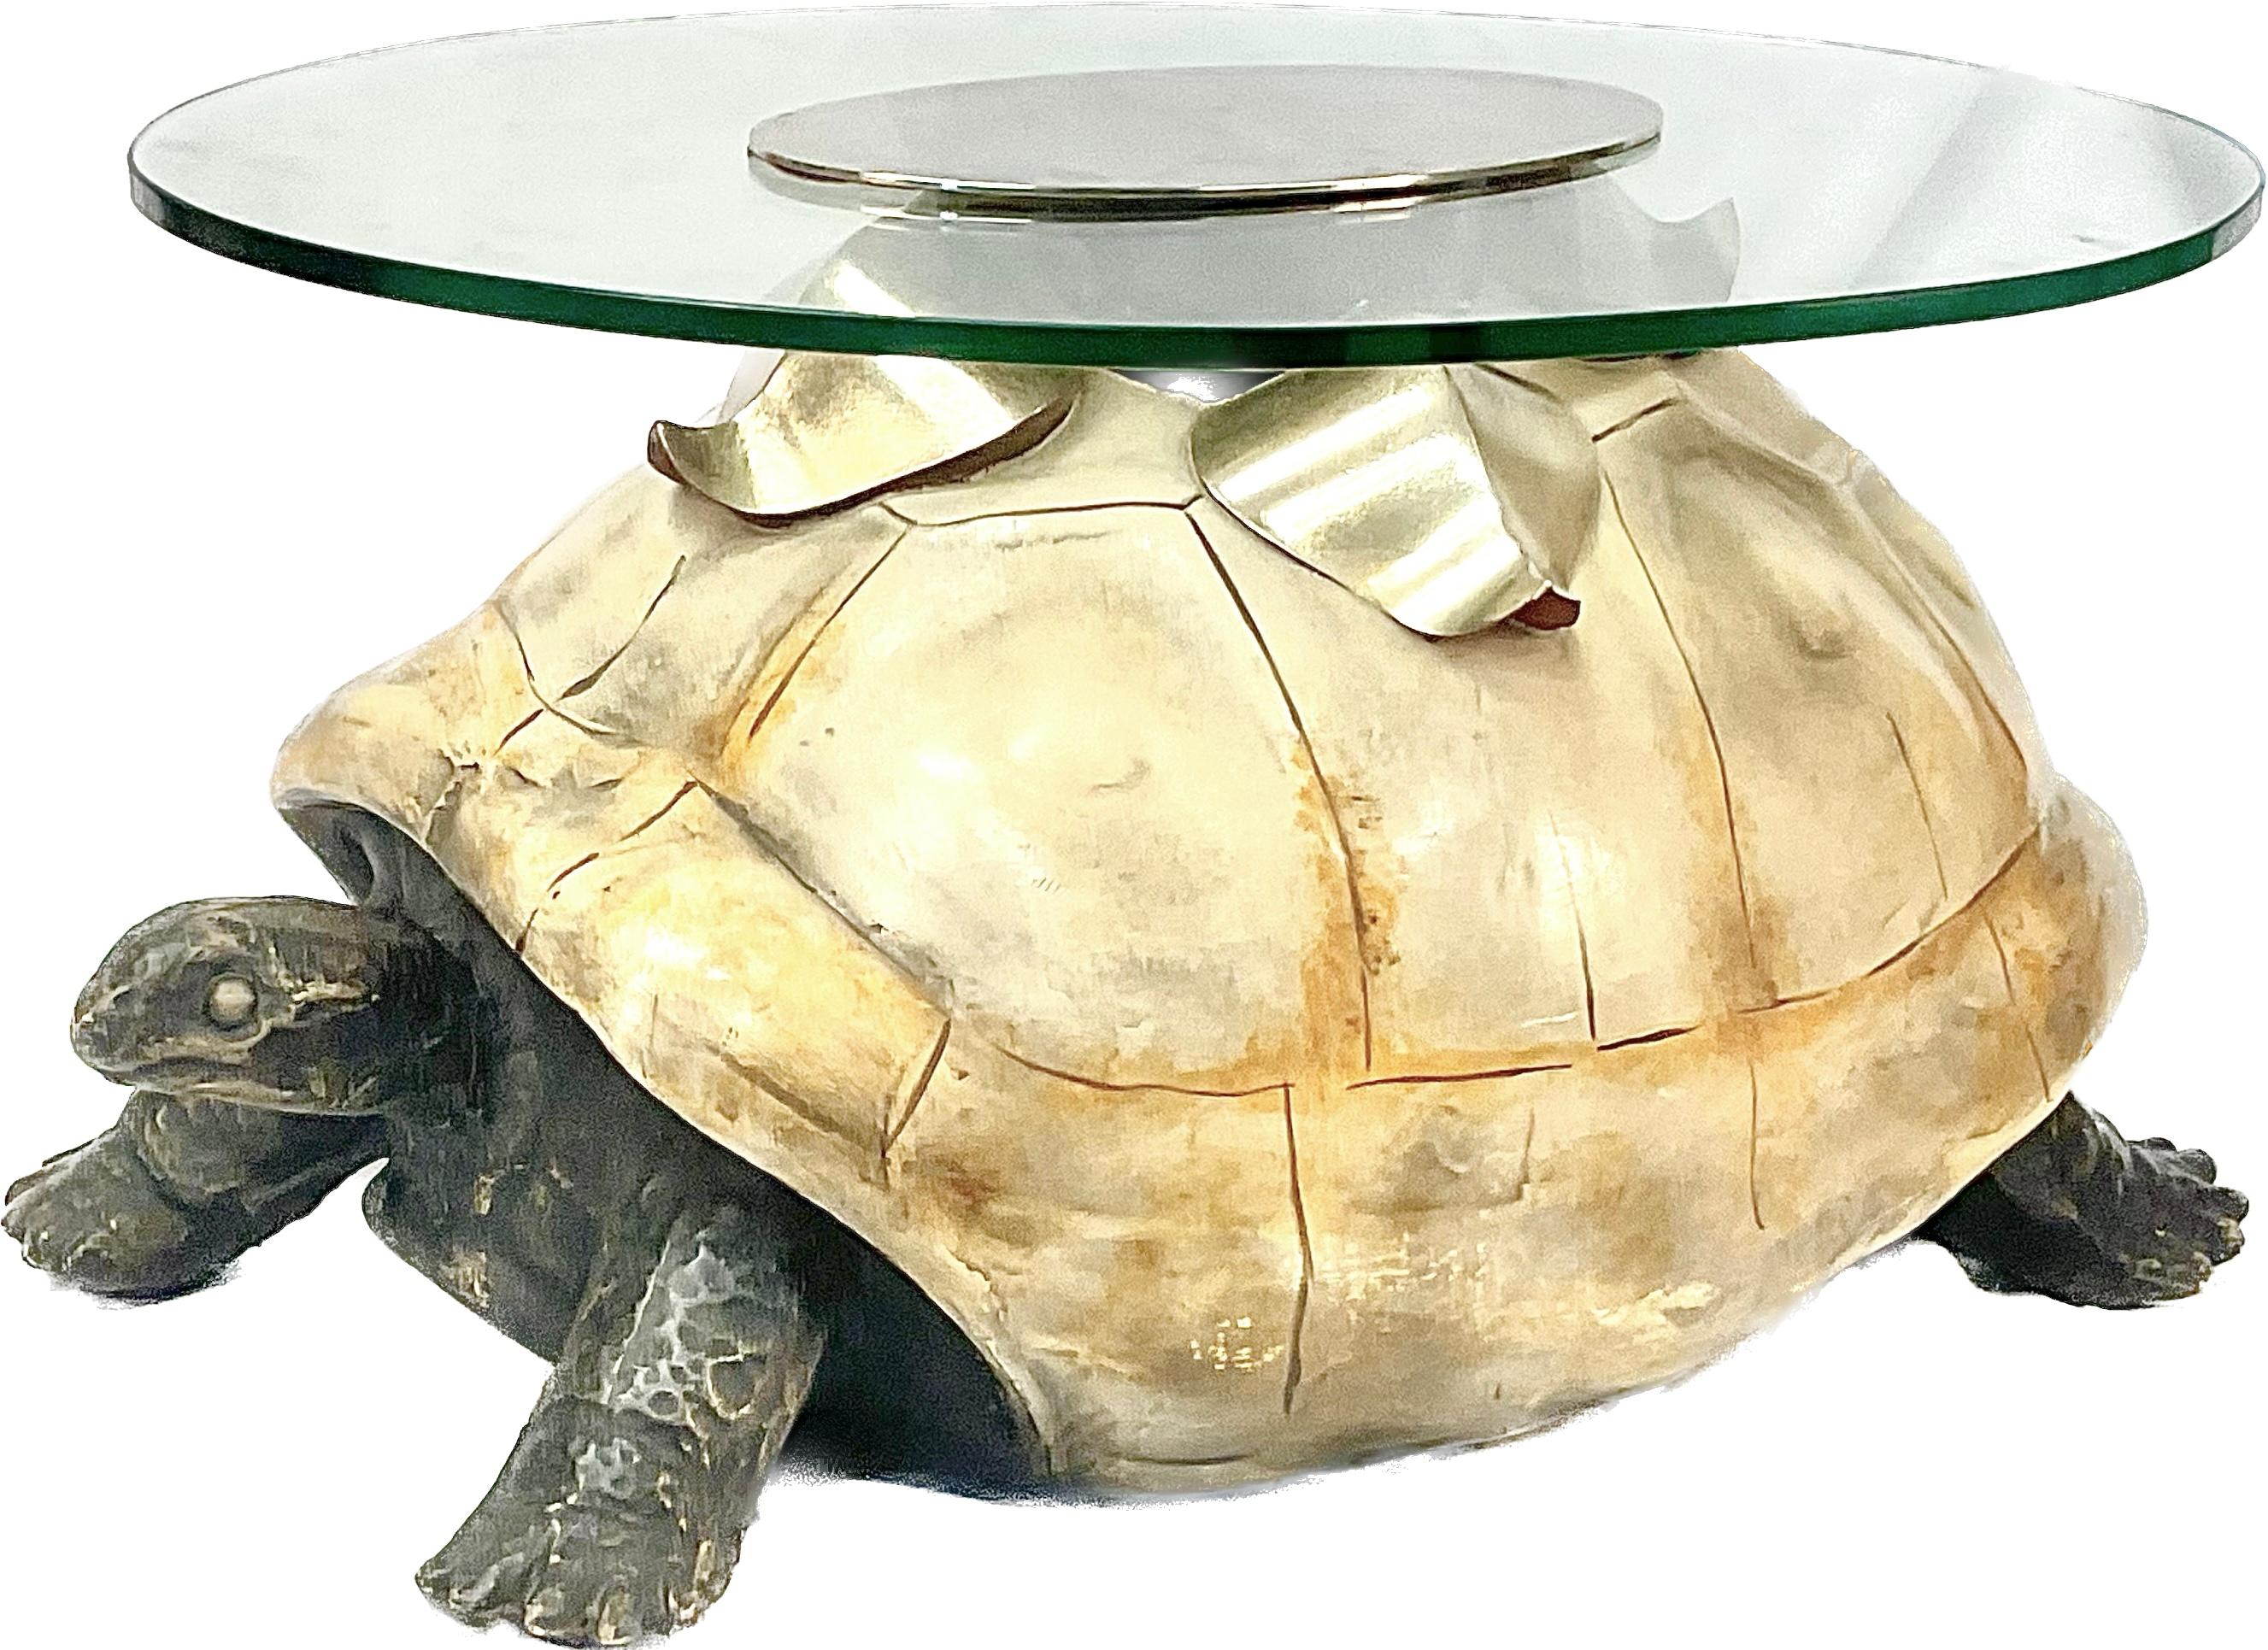 A coffee table by Anthony Redmile, London, circa 1970. Base of the table is fashioned from composite painted turtle under a circular glass top with center plaque.